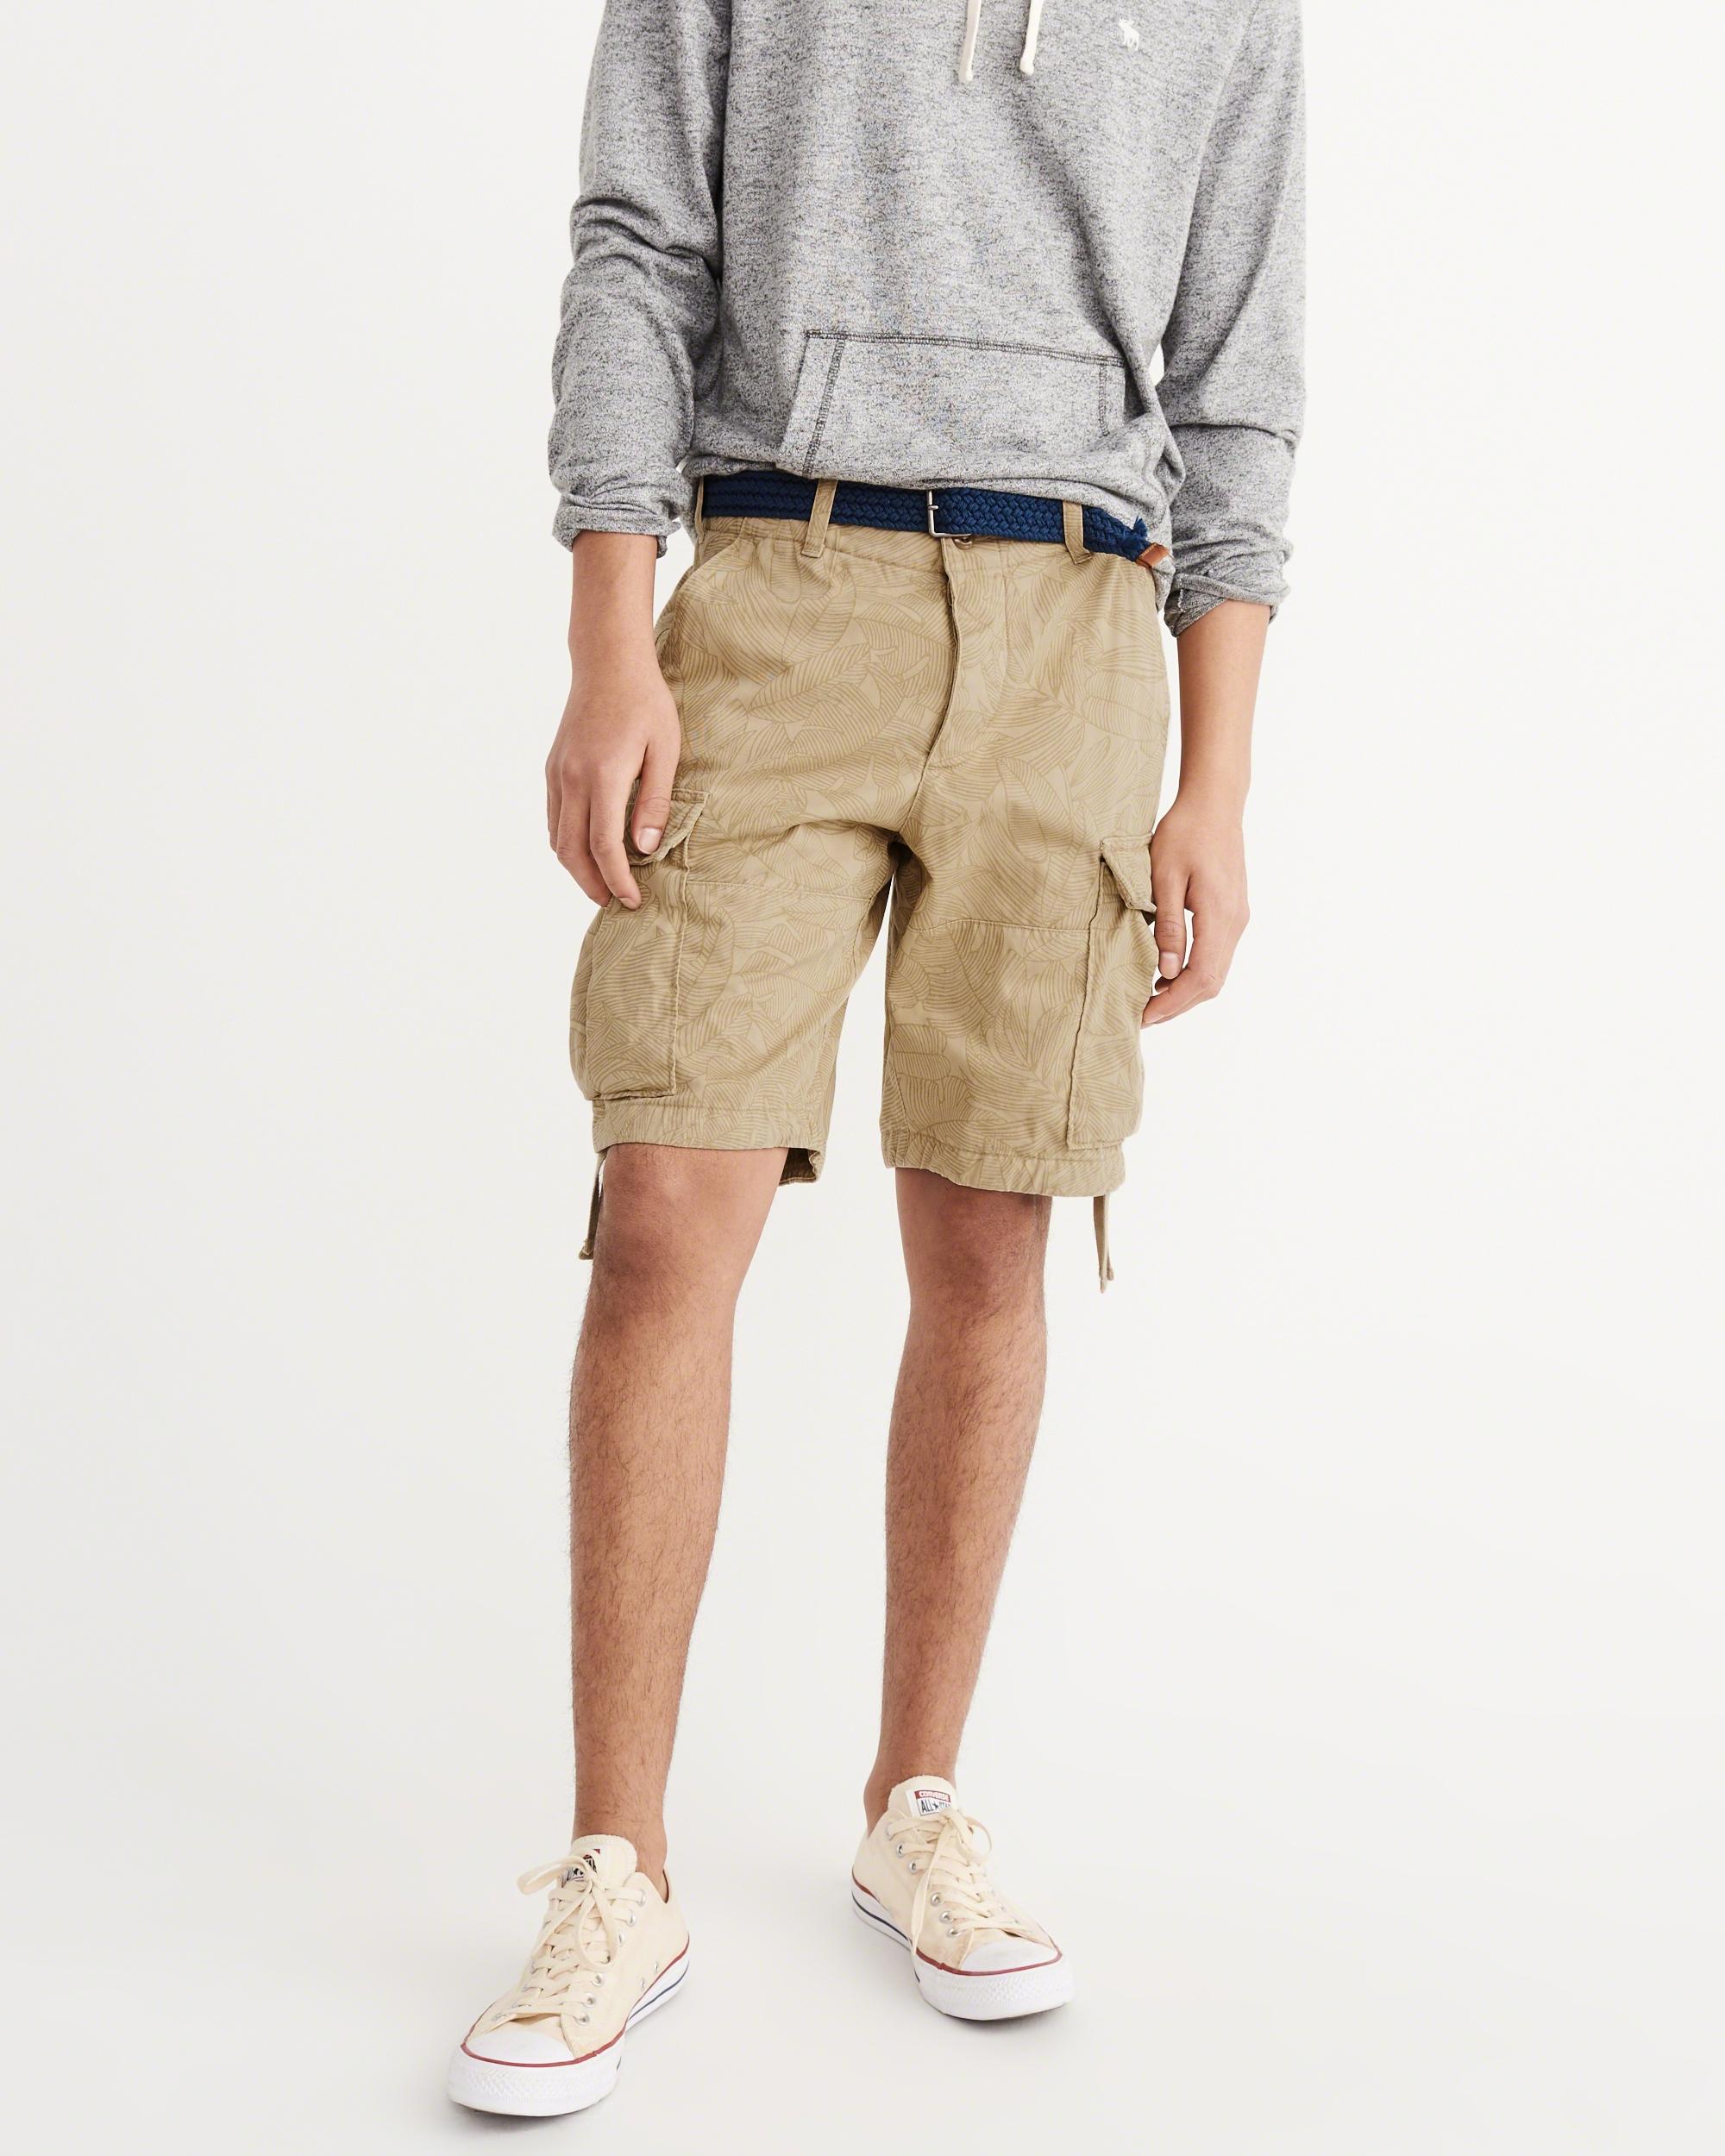 Lyst - Abercrombie & Fitch Cargo Shorts for Men